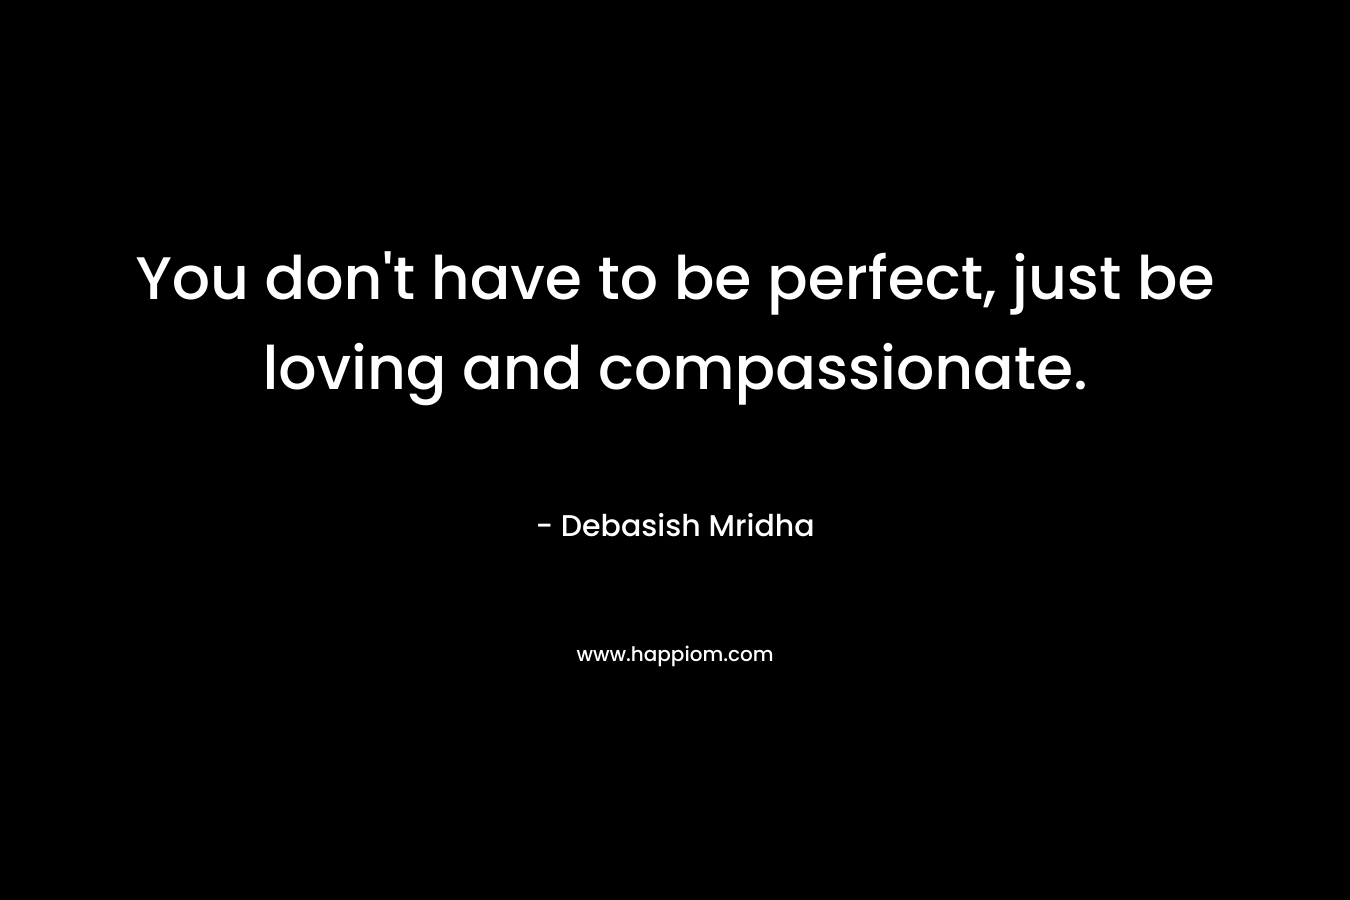 You don't have to be perfect, just be loving and compassionate.